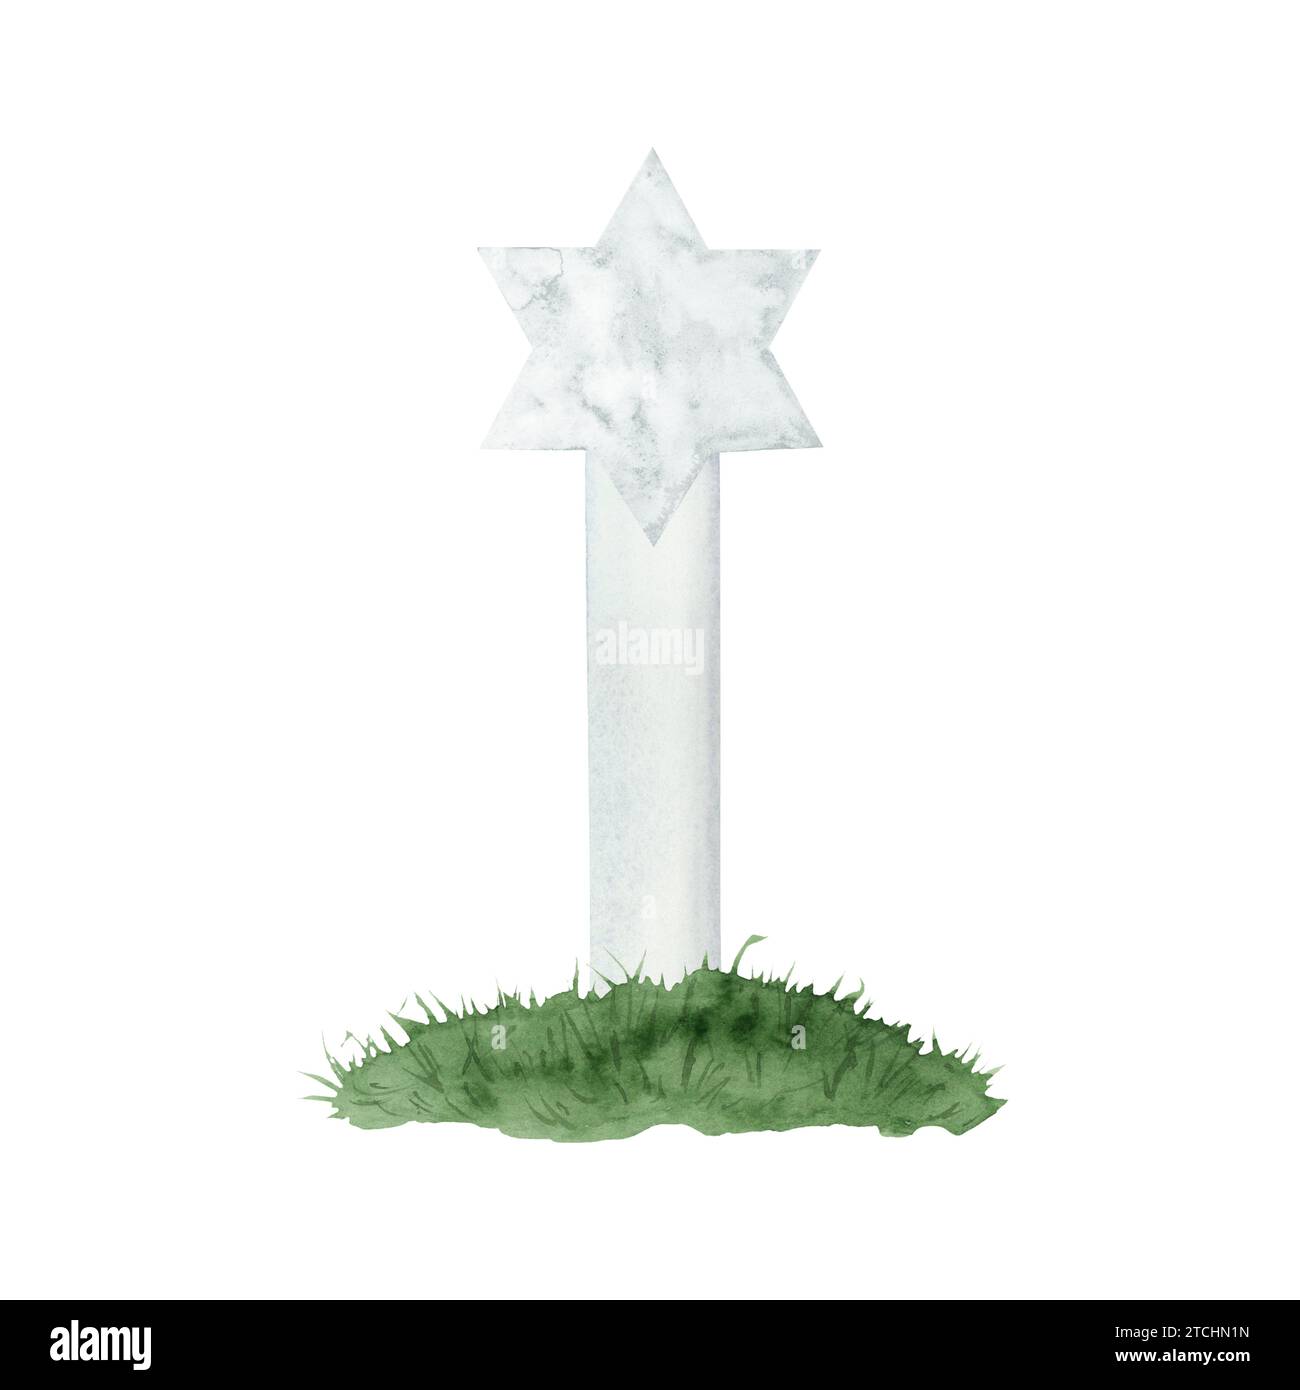 White marble tombstone with star of David for Jewish military cemetery on grass hill template watercolor illustration Stock Photo